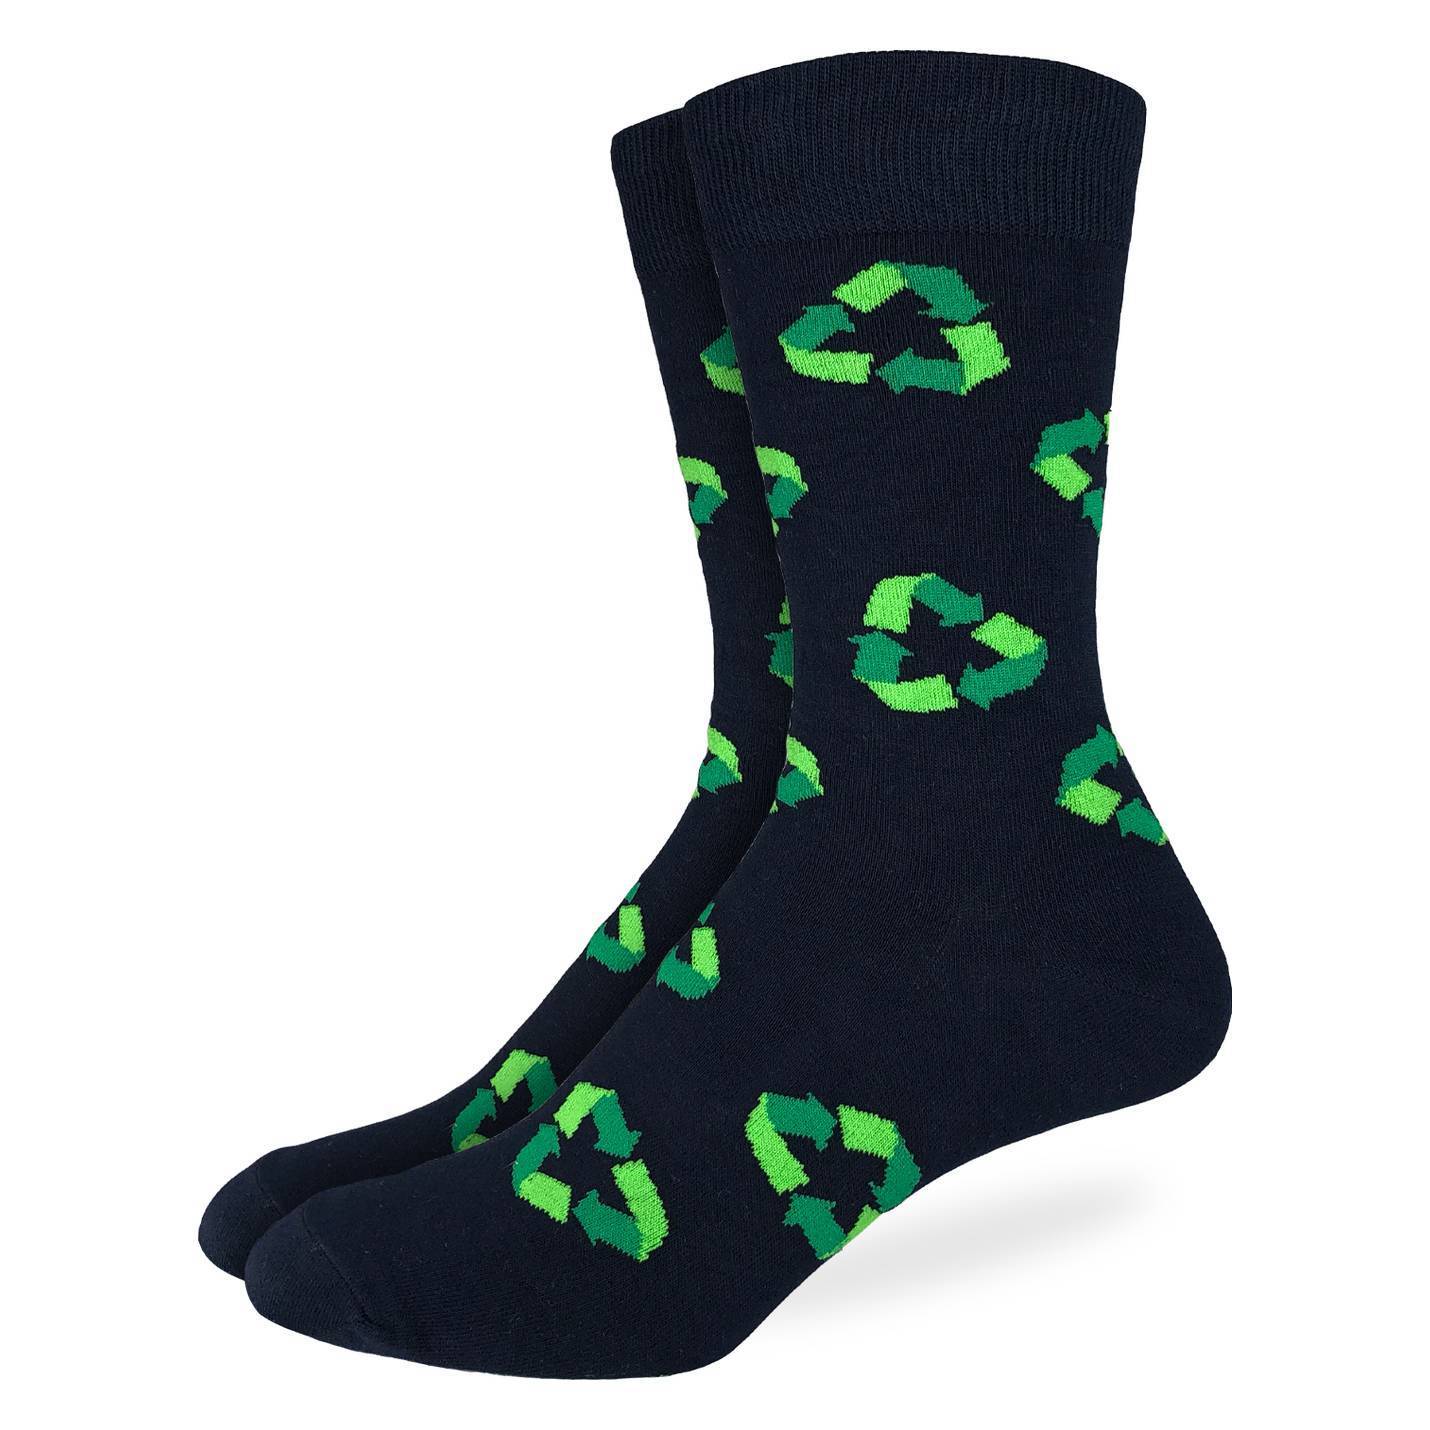 Good Luck Sock - Recycle Please